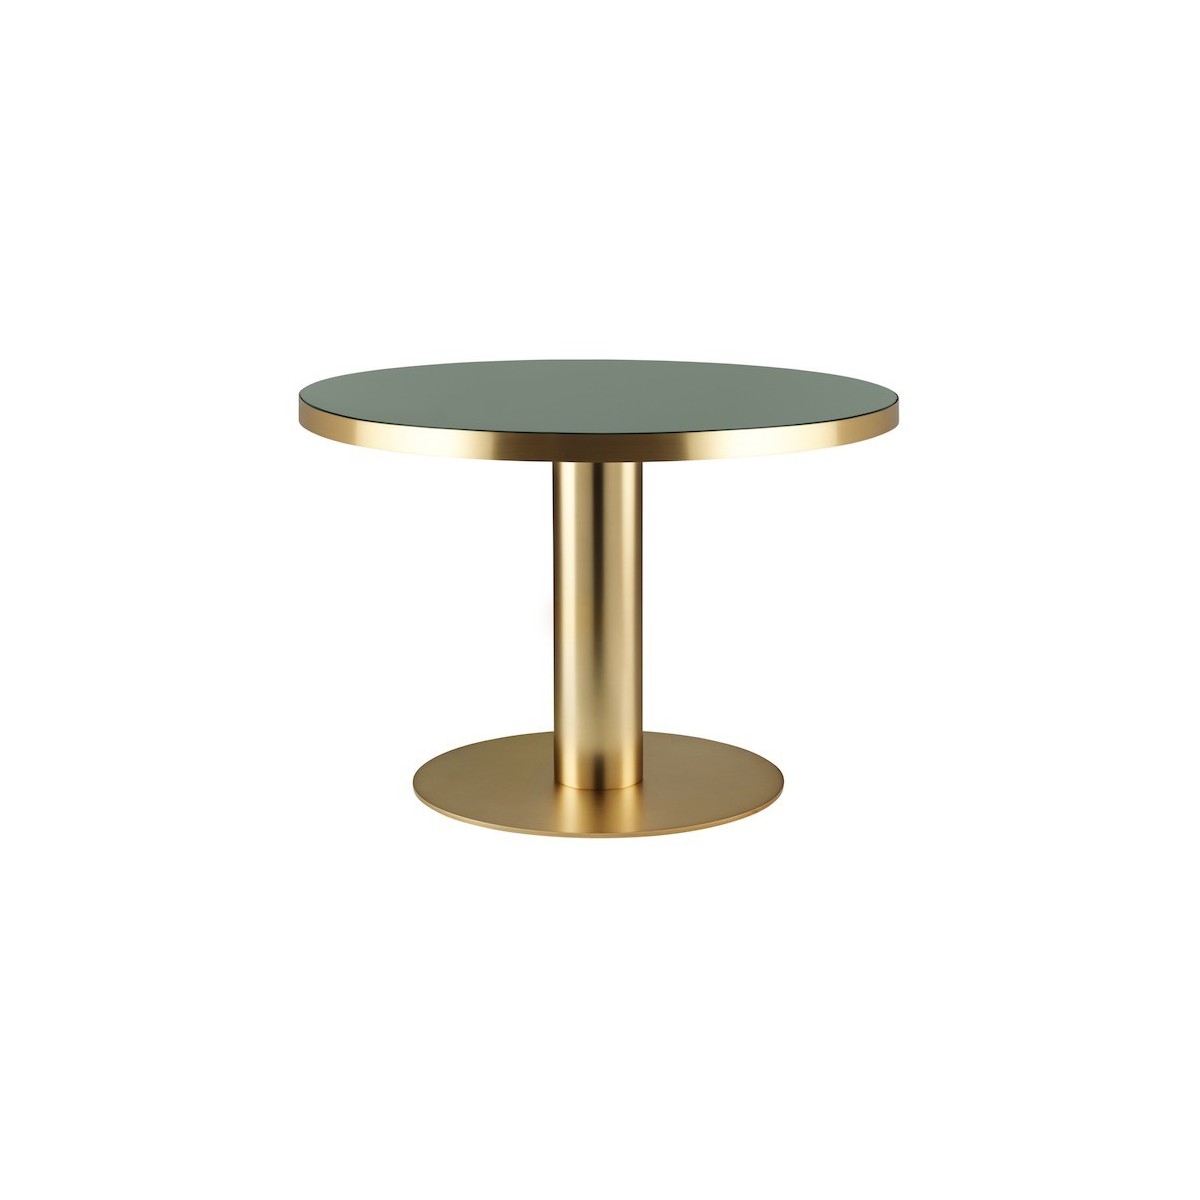 Bottle green + brass base - Gubi 2.0 round table - glass table top